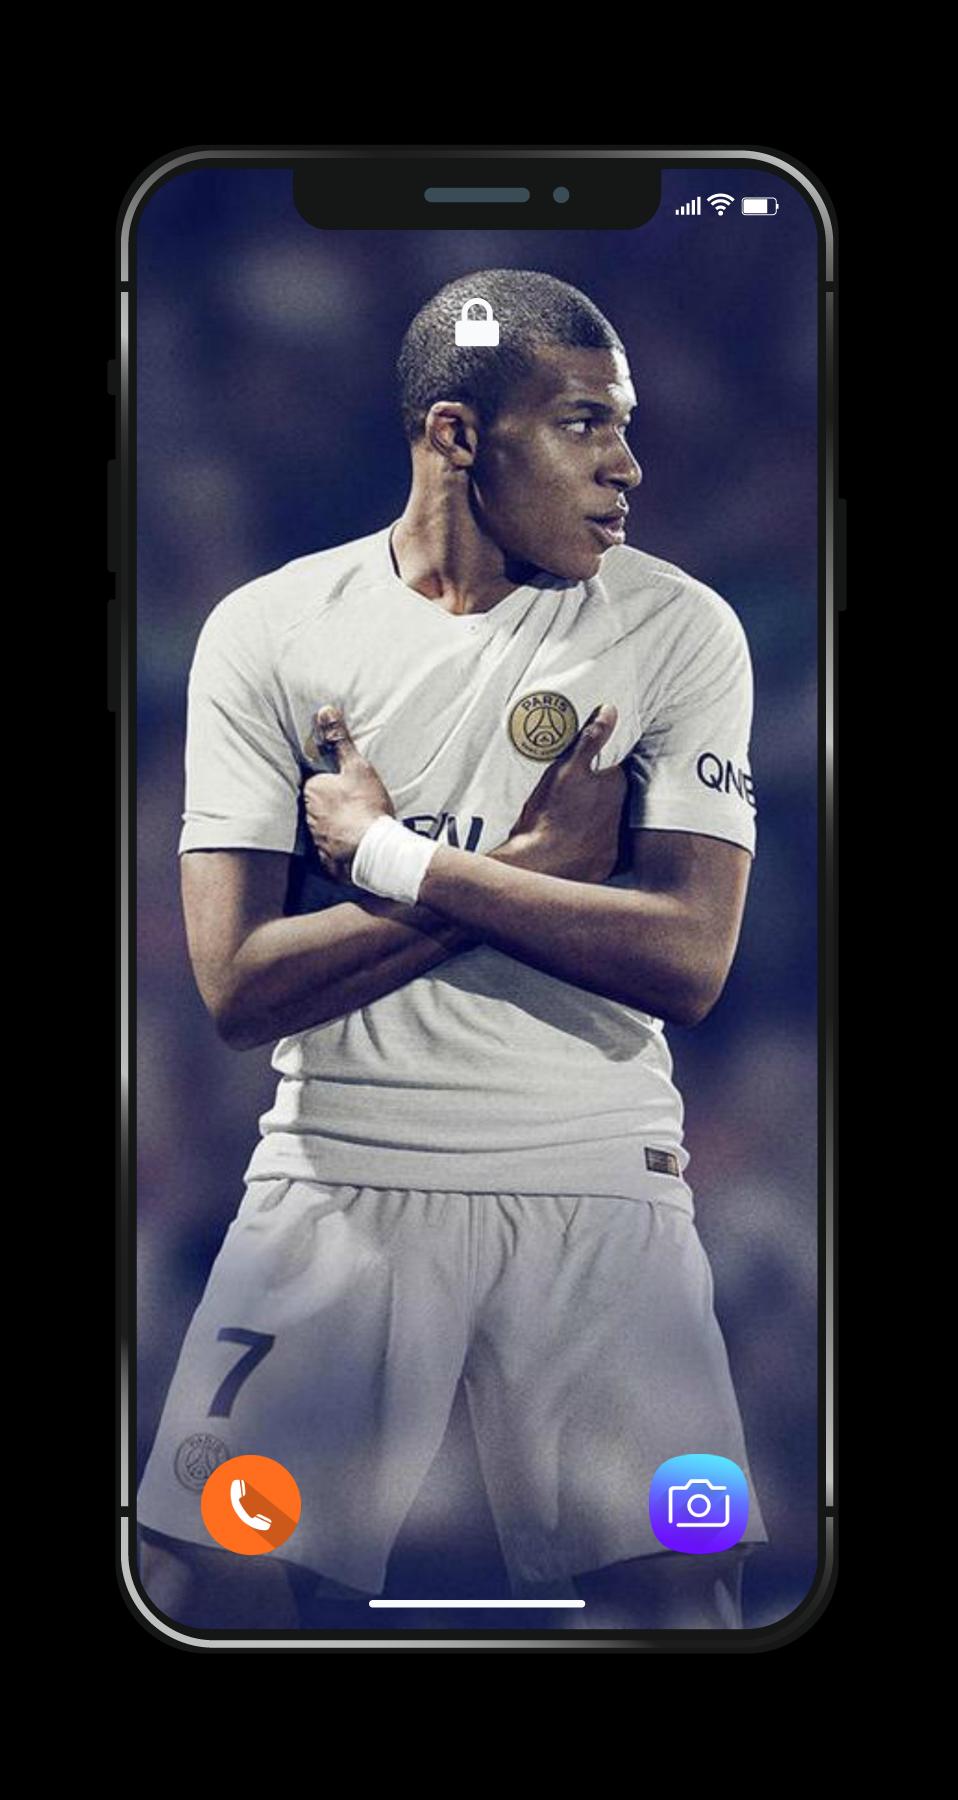 Mbappe Wallpapers Hd 4k Kylian Mbappe Photos For Android